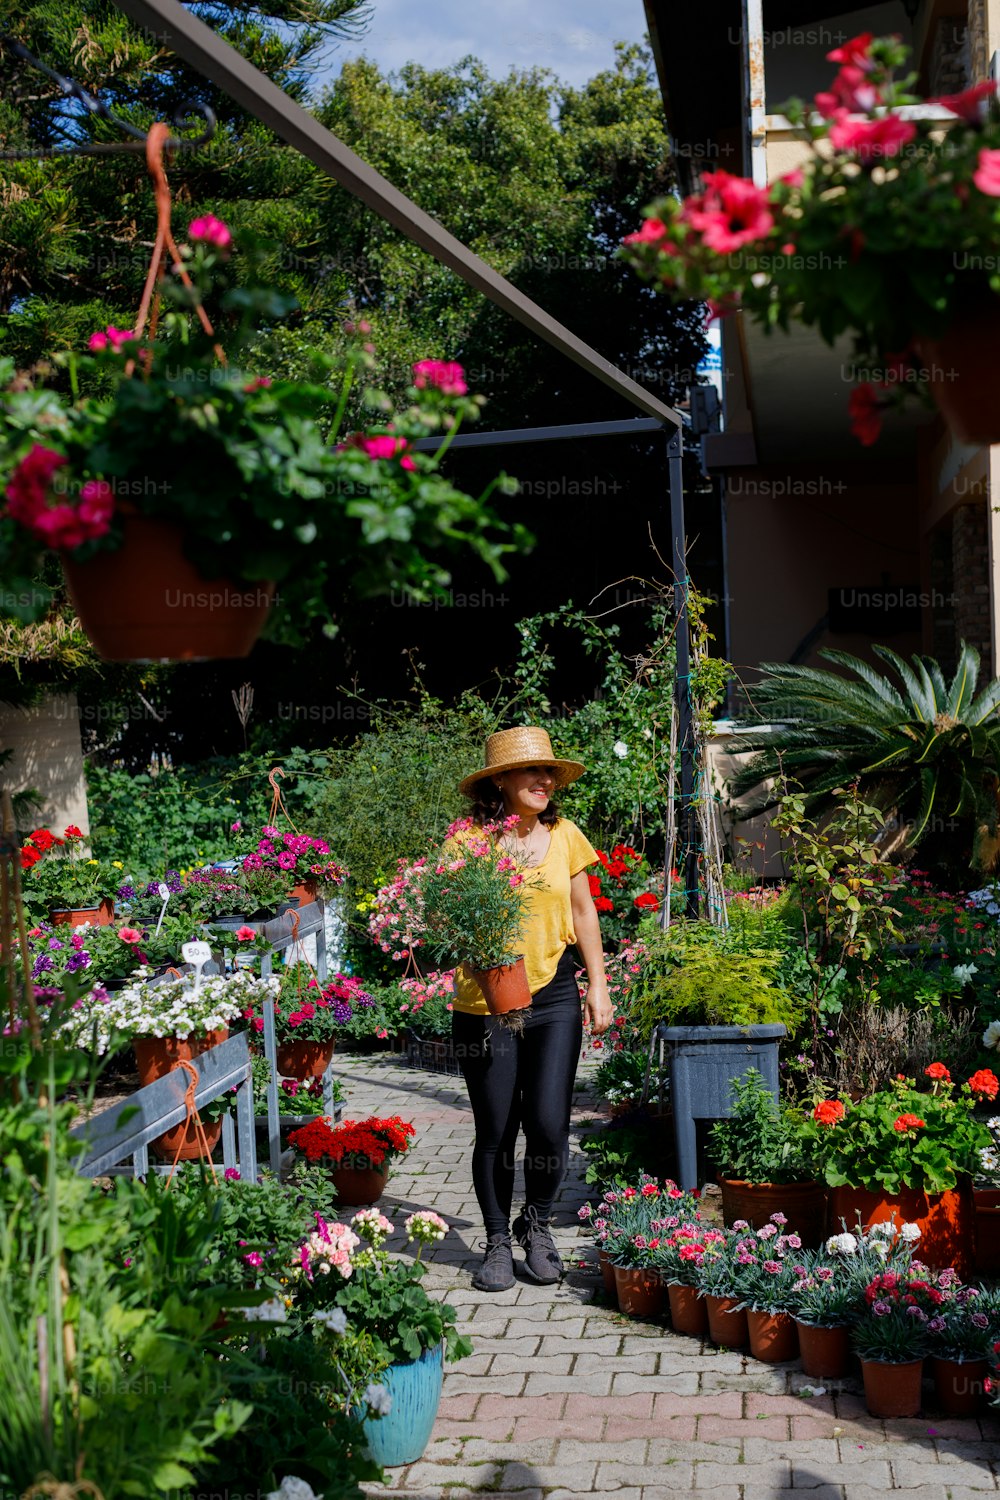 a woman walking through a garden filled with lots of flowers